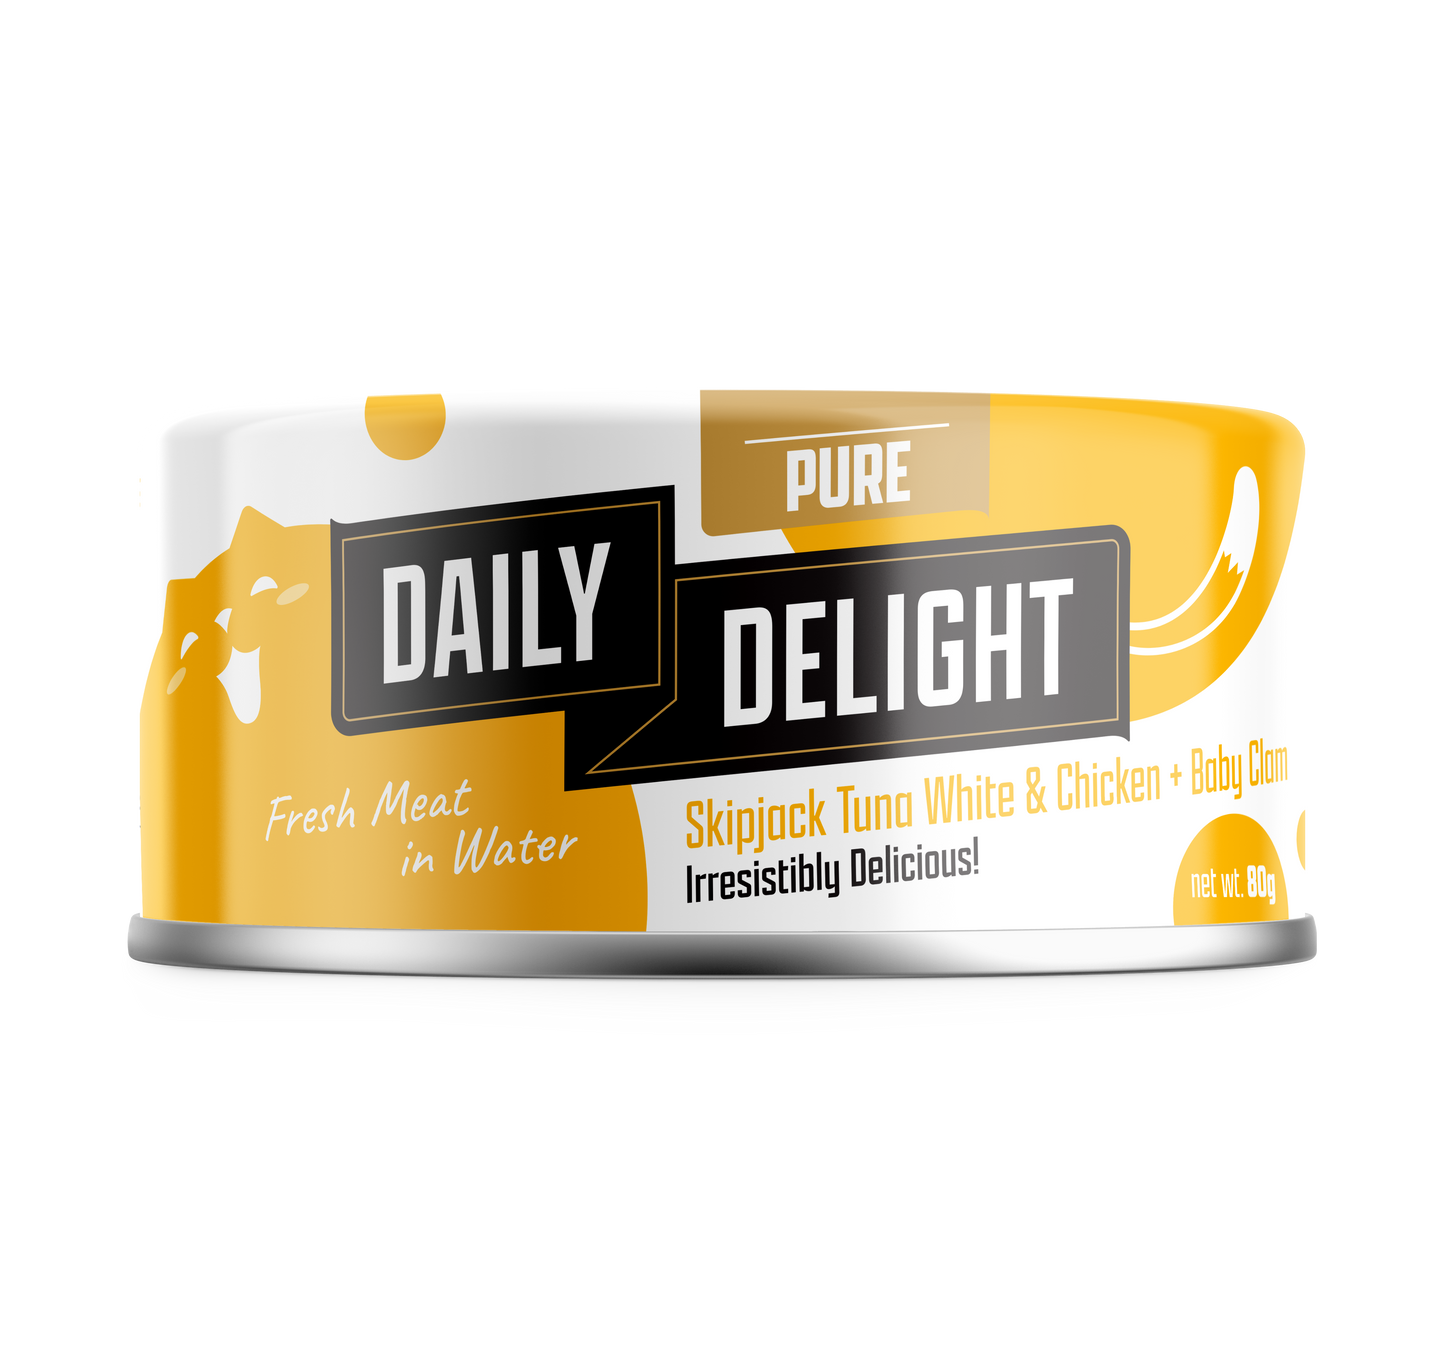 Daily Delight Pure Skipjack Tuna White & Chicken with Baby Clam 80g-Daily Delight-Catsmart-express